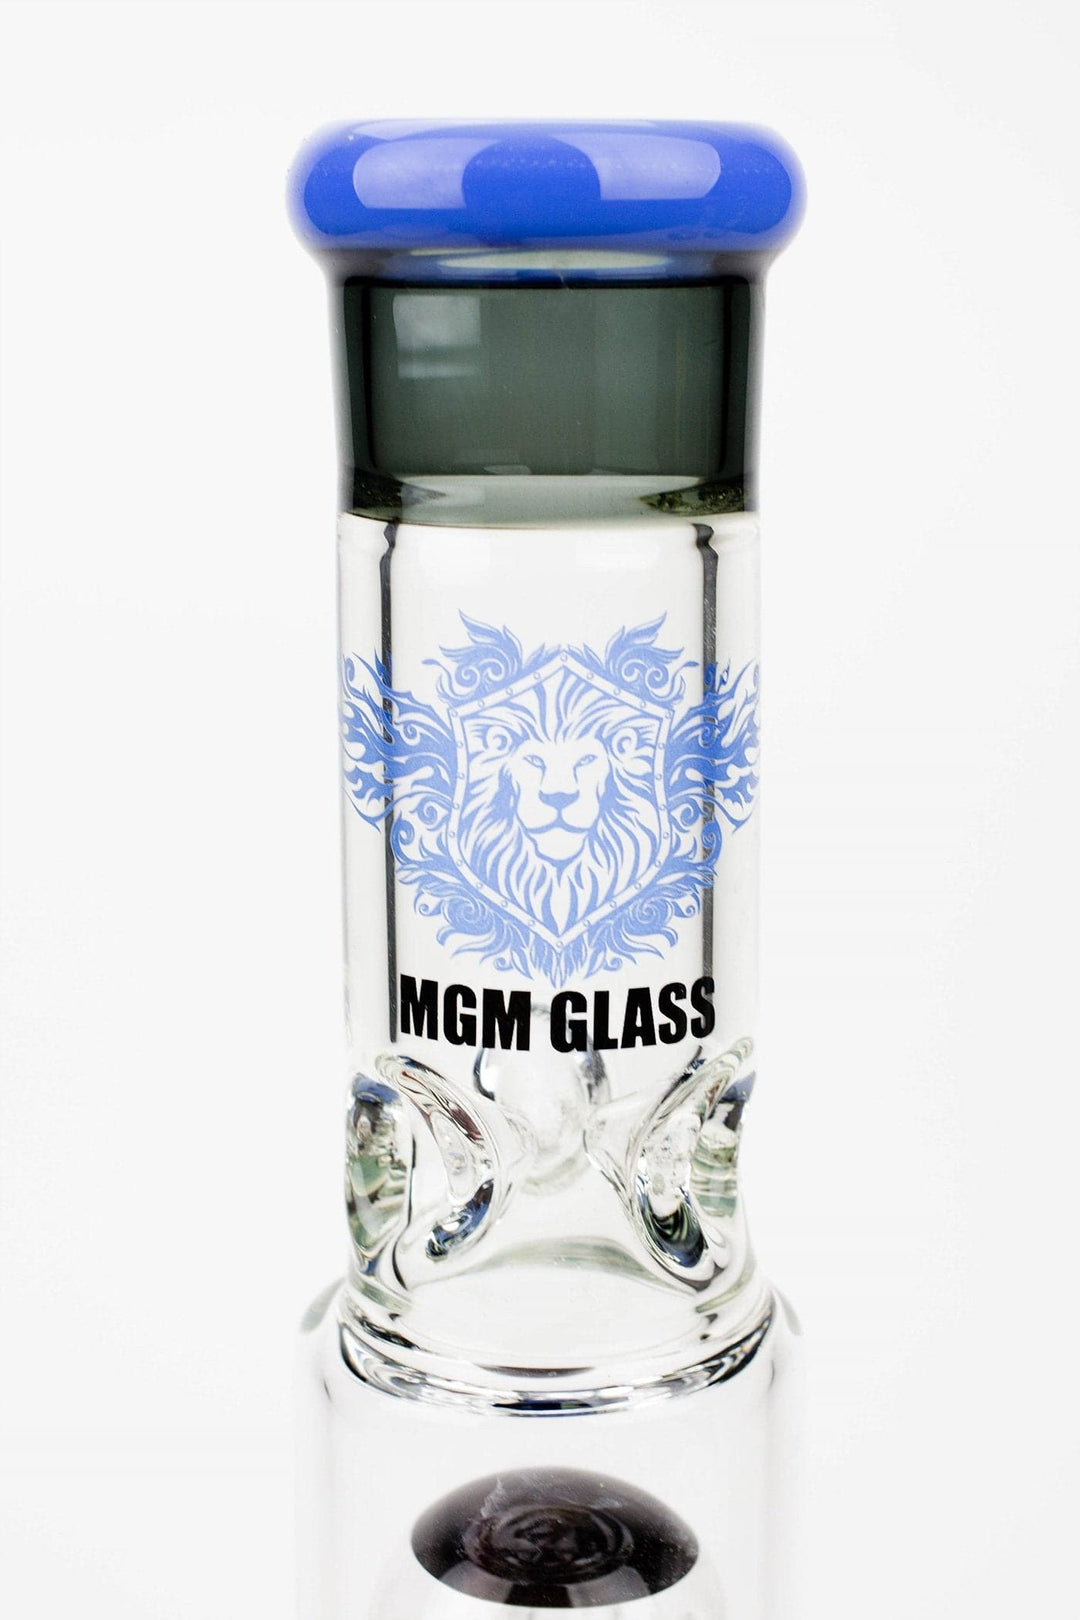 Mgm glass single tree arm glass water pipes_10